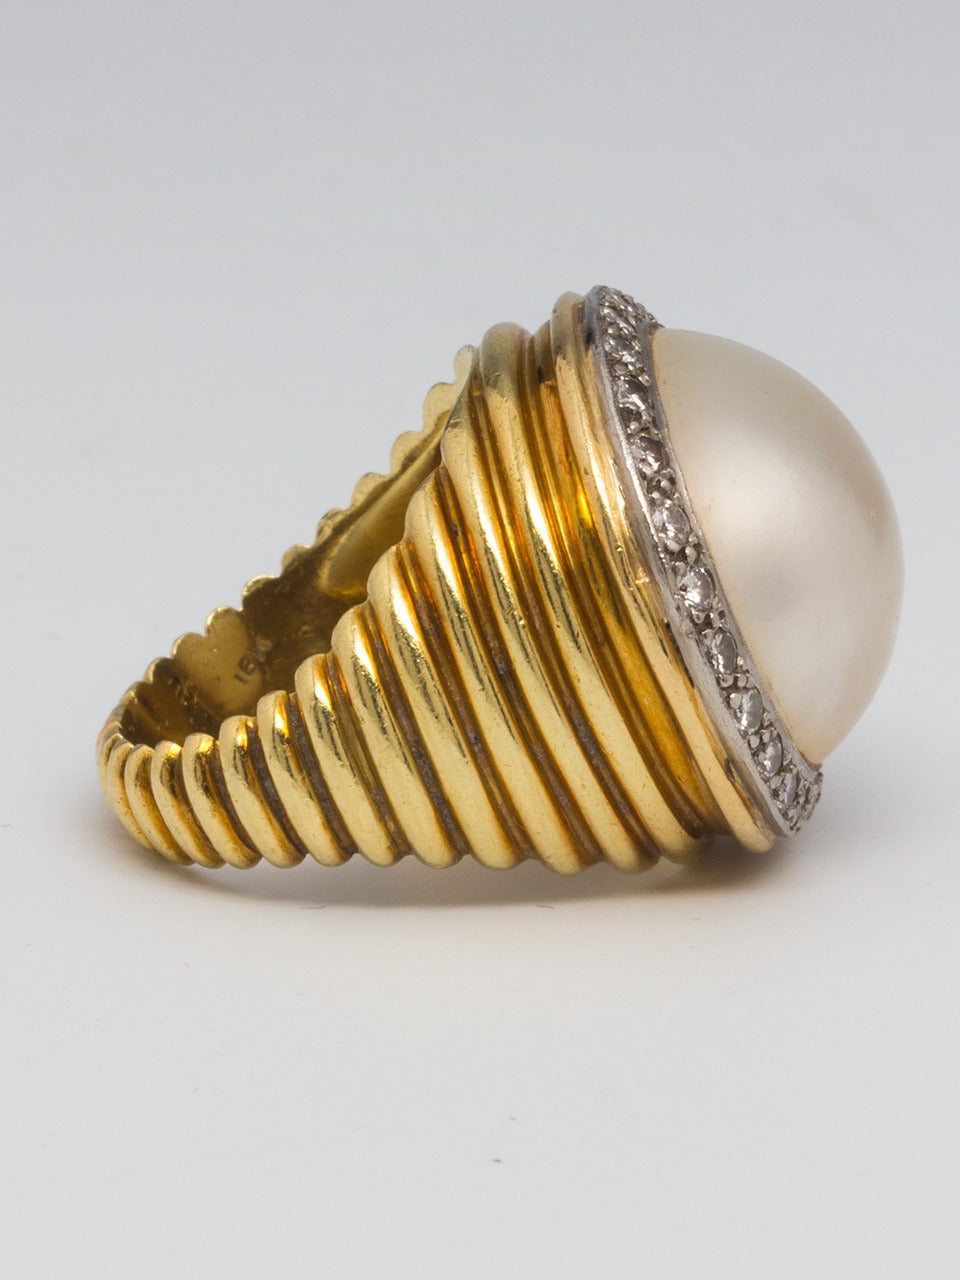 Fluted 18k yellow gold setting with a lustrous creamy color 18mm mabe pearl surrounded by 24 diamonds approximately 0.72 carat total weight, circa 1960's. Big, bold and fun cocktail ring. 7.25 ring size. 

As a special offering for our 1stdibs